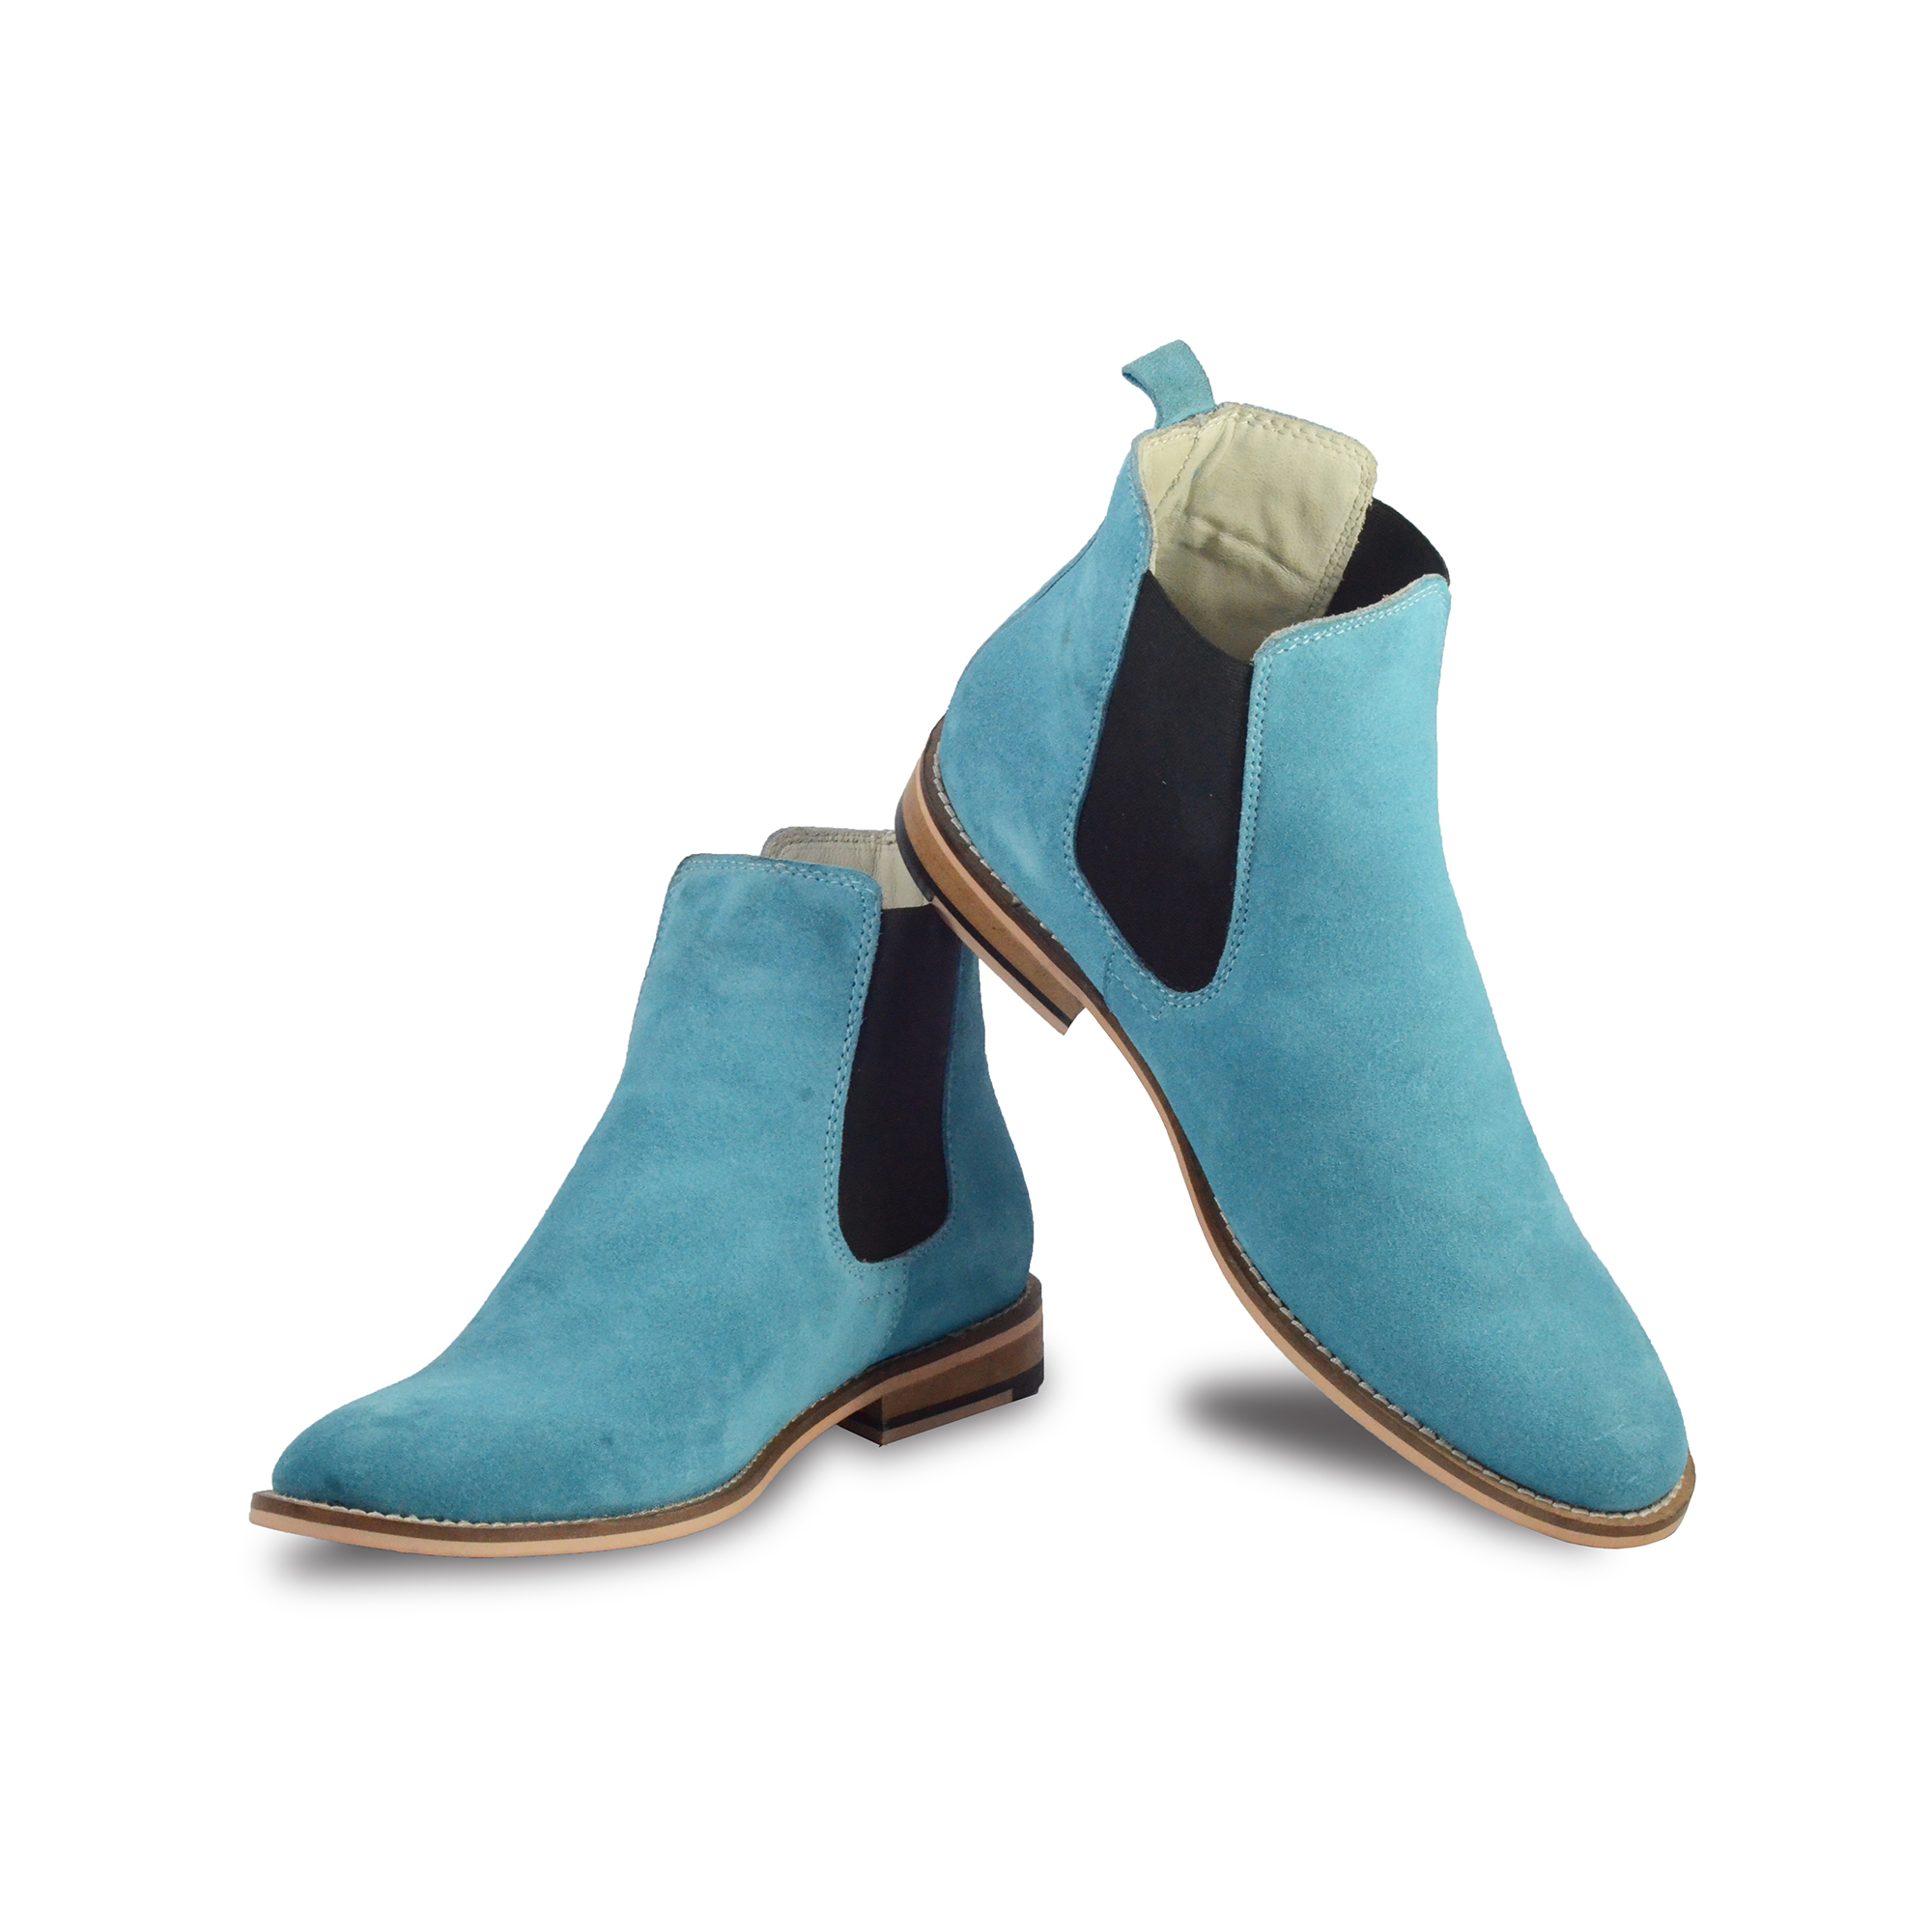 bille sygdom miste dig selv Chelsea Boots - Buy 6 inches Pure Turquoise Suede Leather Chelsea Boots  online at Factory Prices. | Agra Shoe Mart